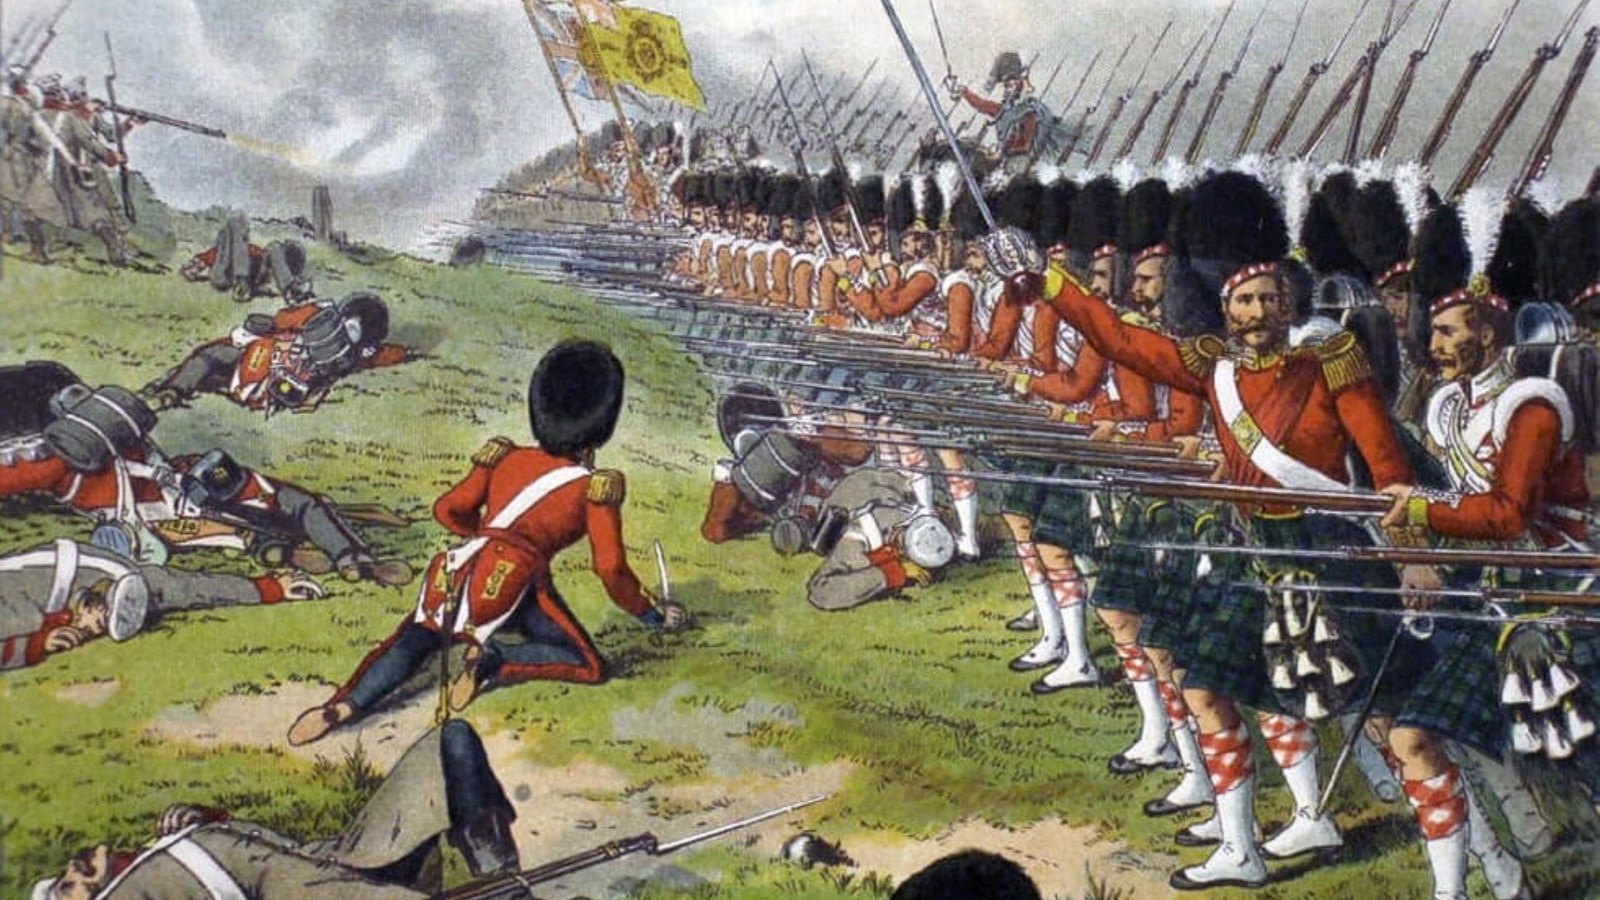 lithograph of kilted redcoated soldiers marching in step onto a battlefield with injured soldiers.